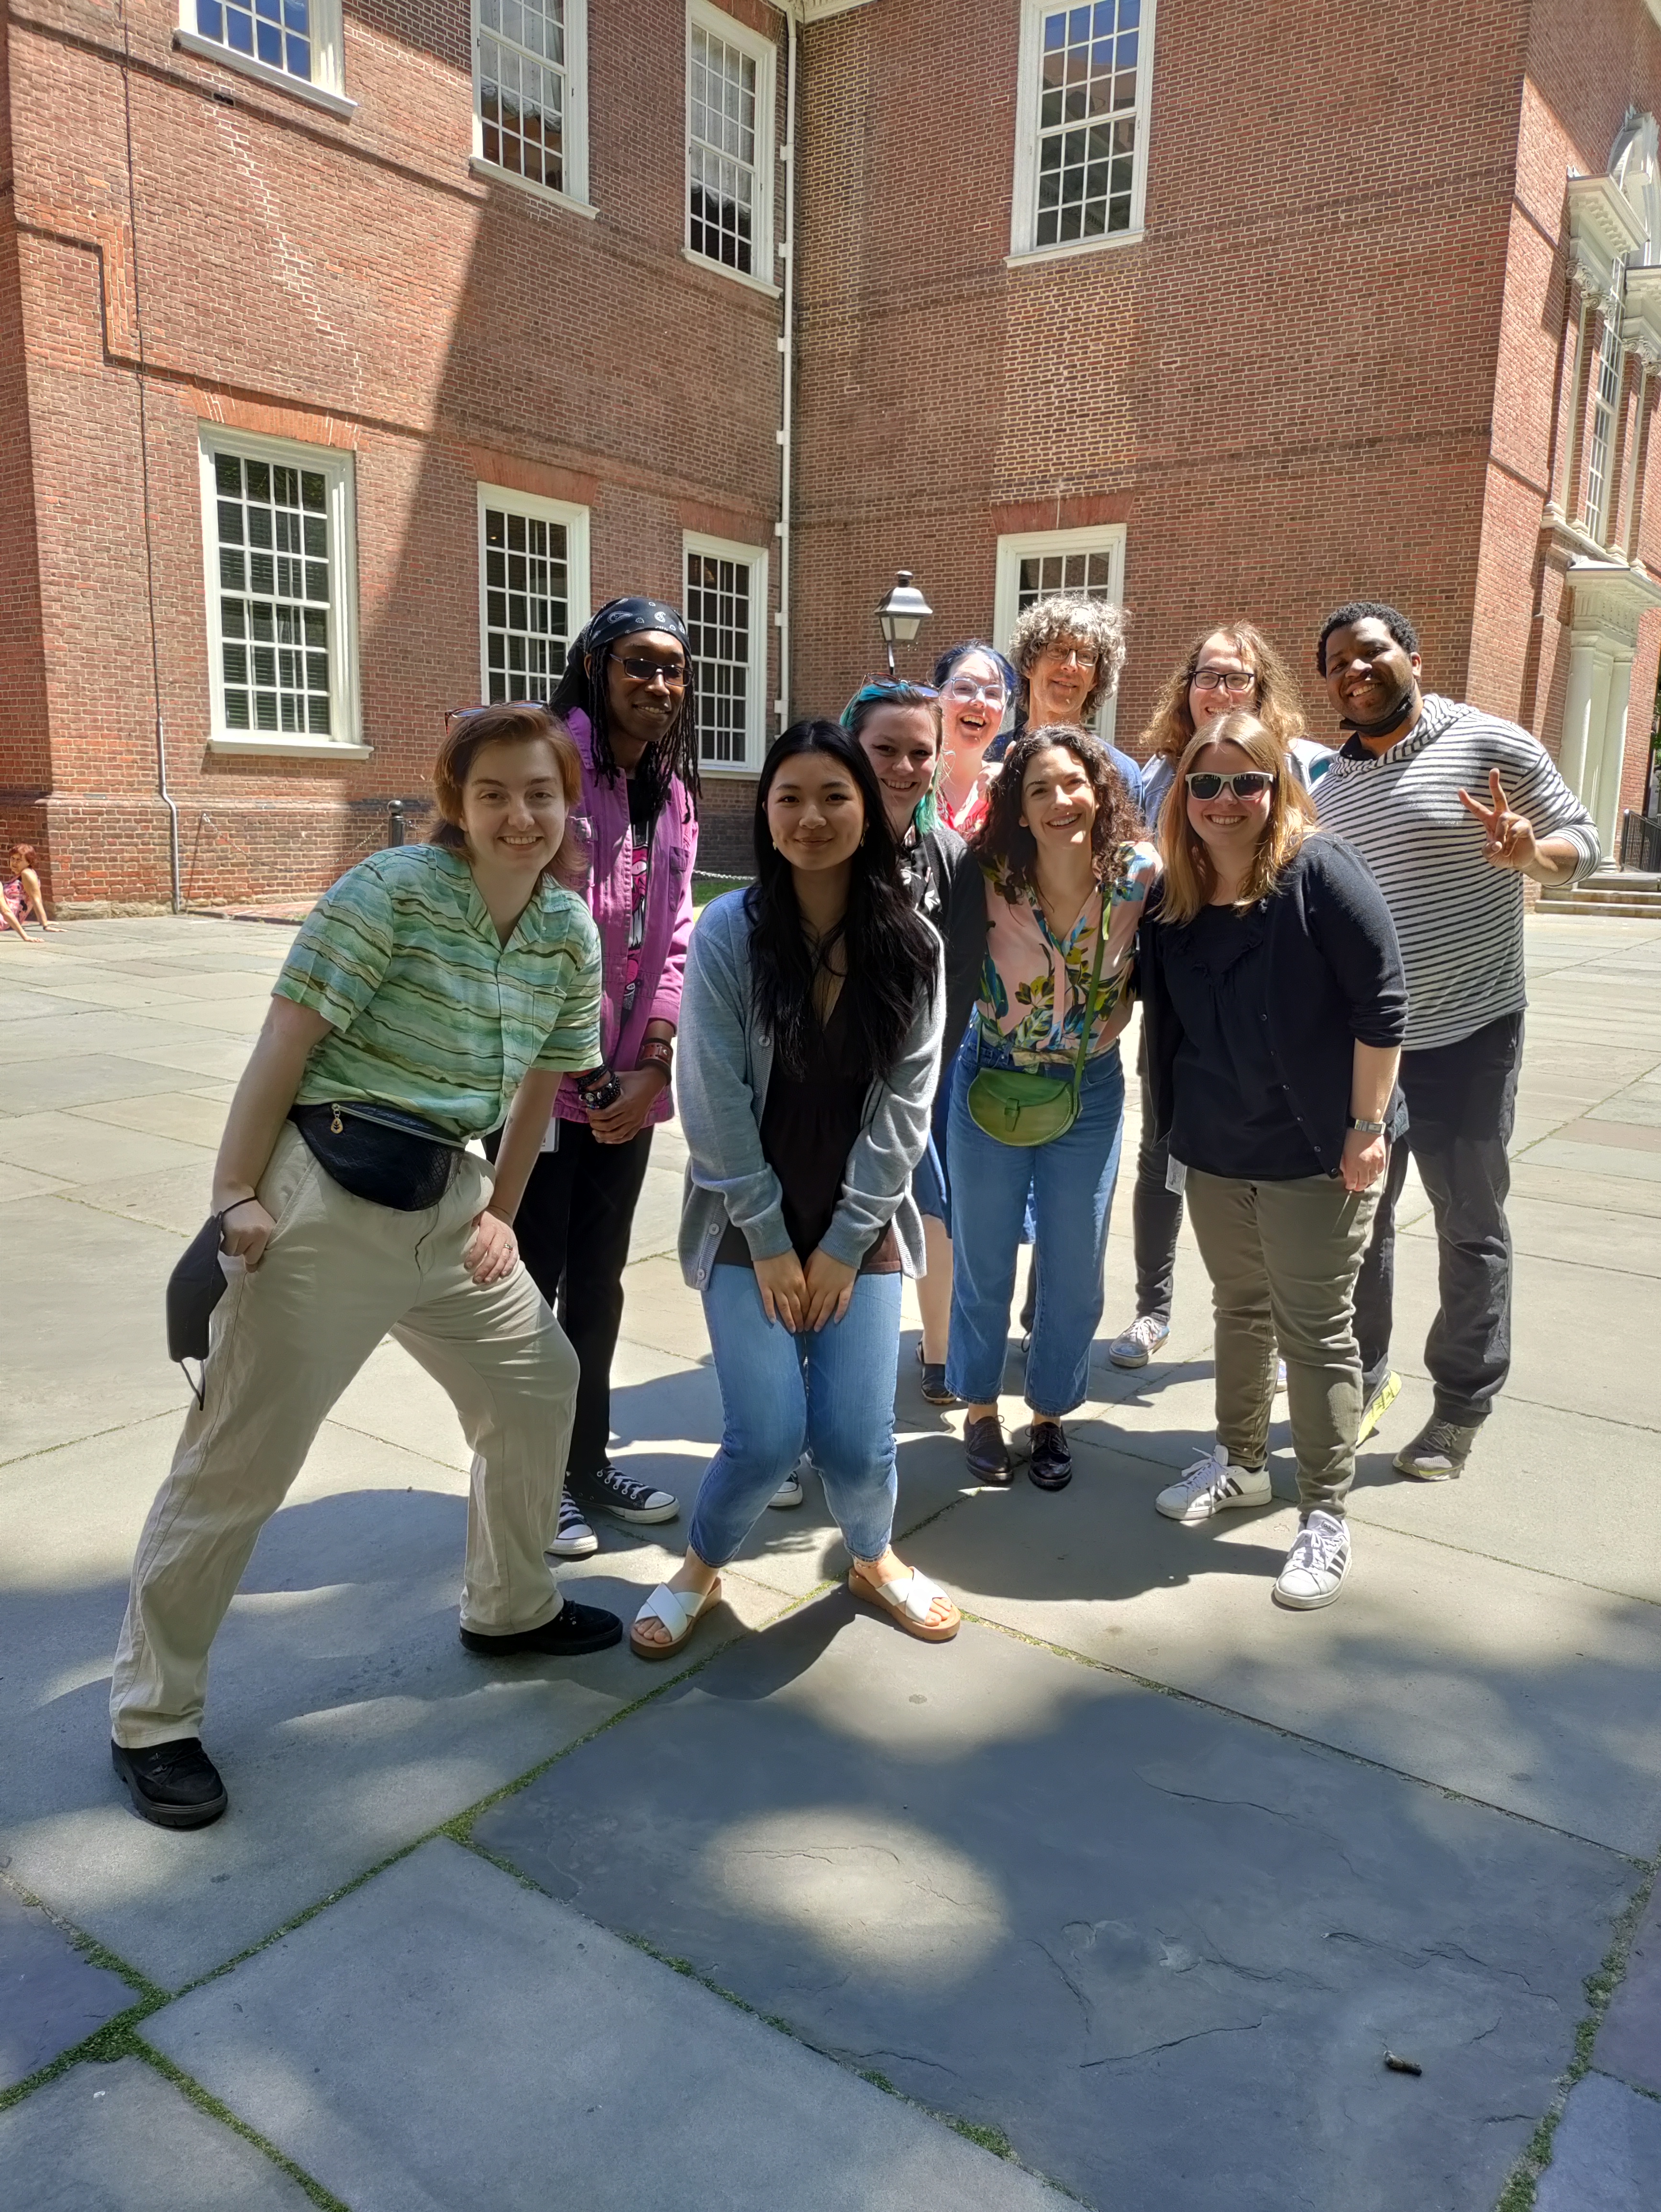 photo of 10 people standing outside in front of brick building on a sunny day